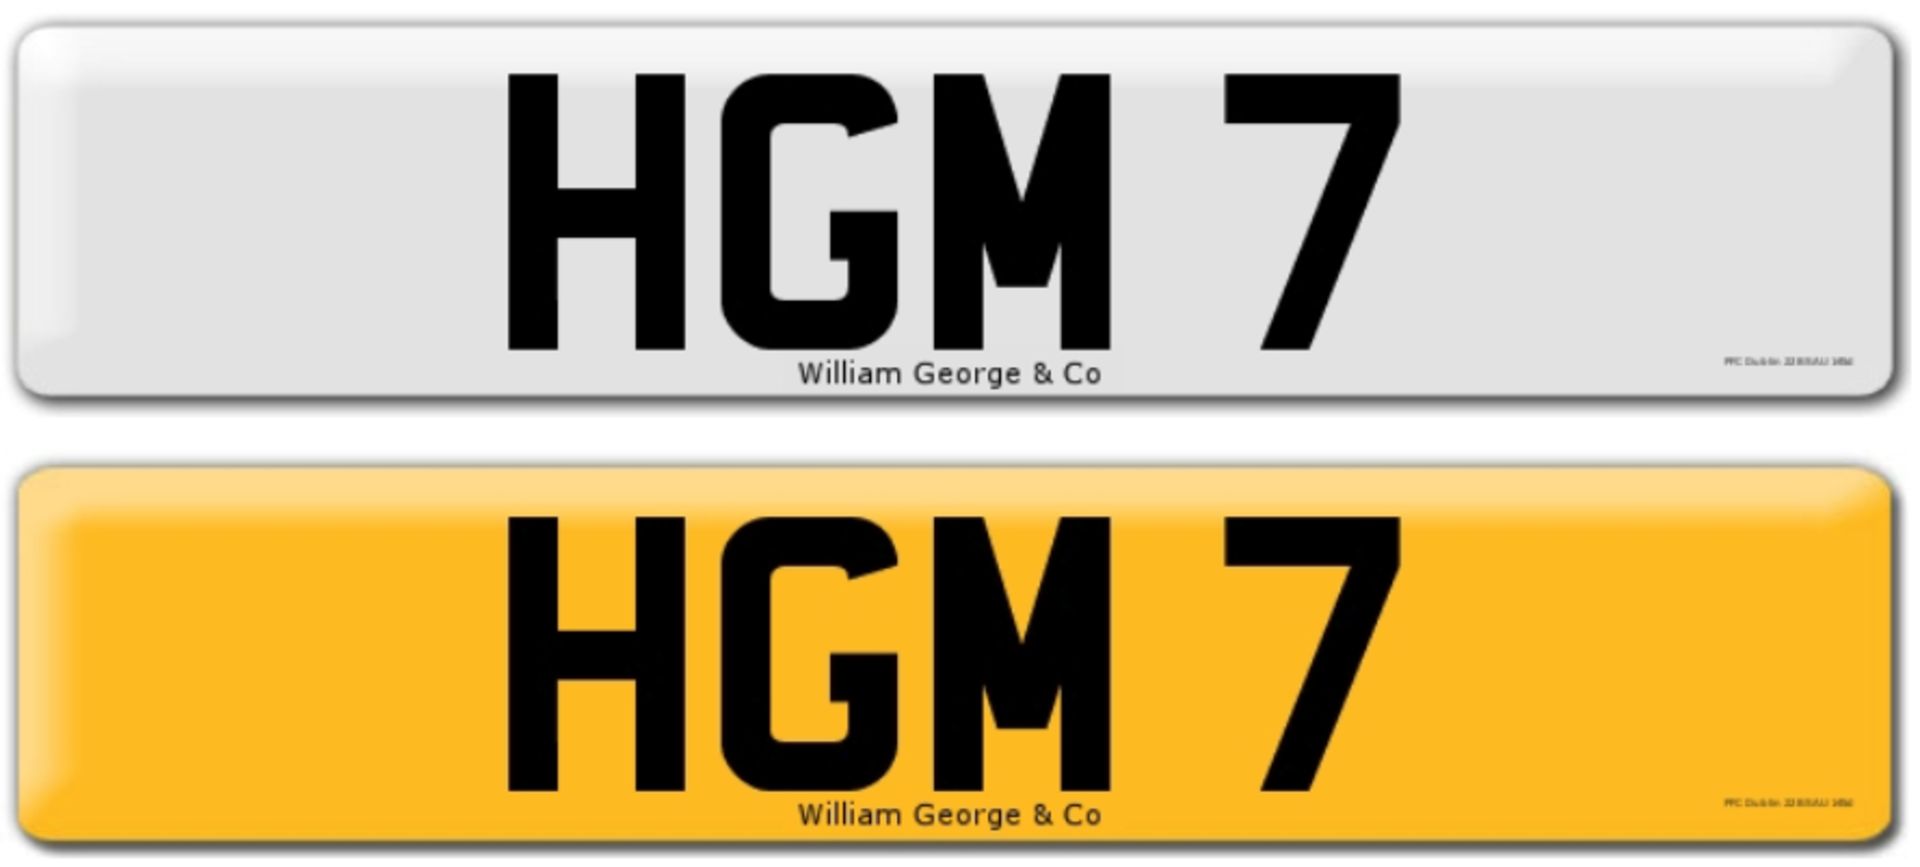 Registration on DVLA retention certificate, ready to transfer HGM 7 This number plate / registration